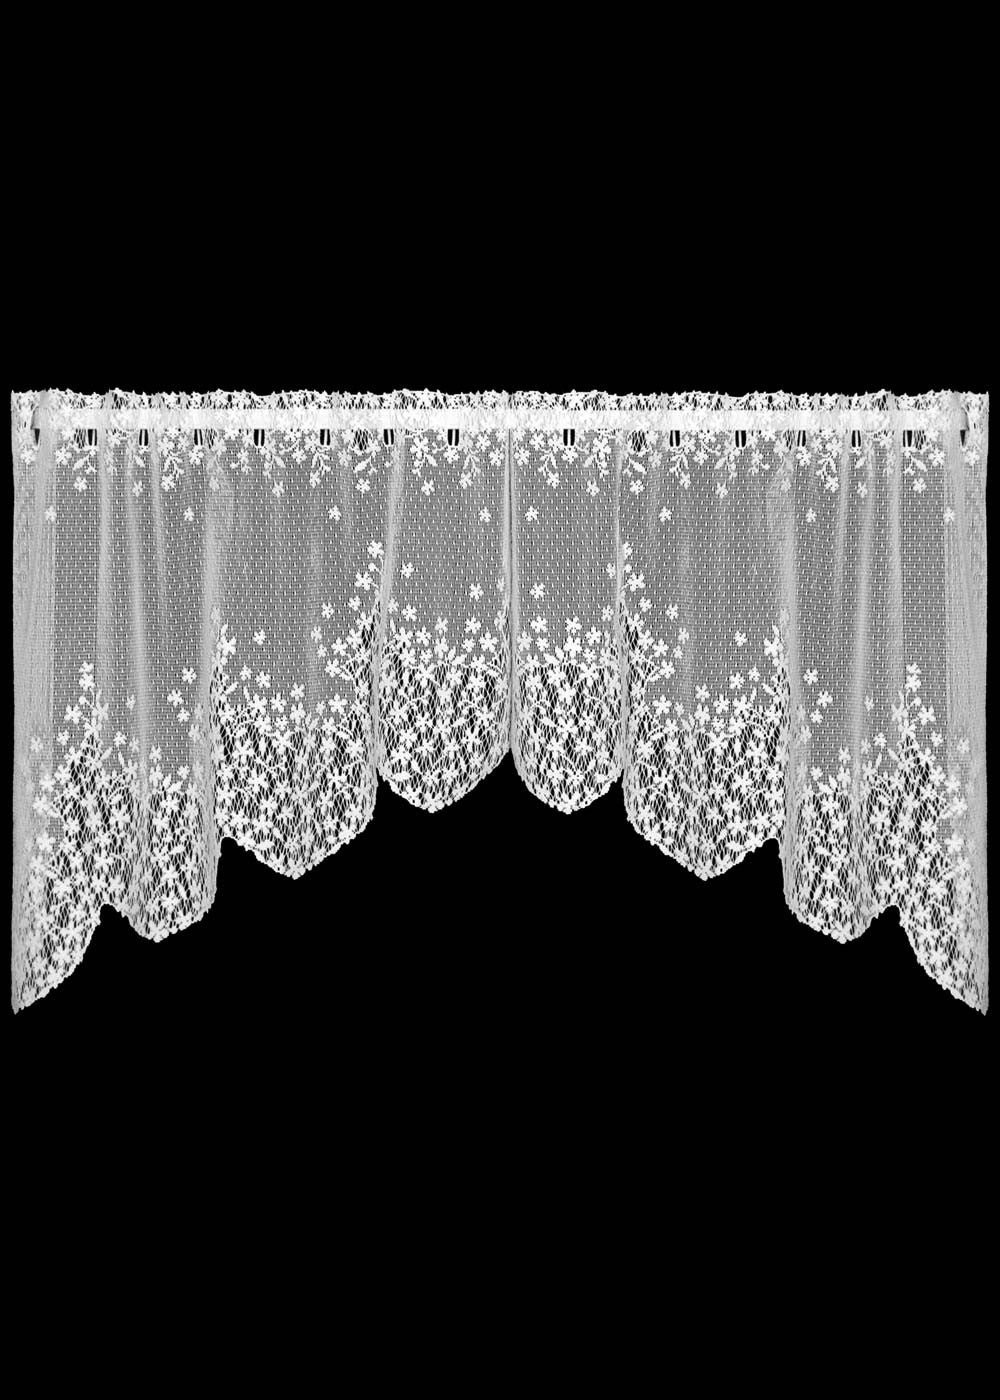 Blossom Lace Valance Curtains - Pine Hill Collections